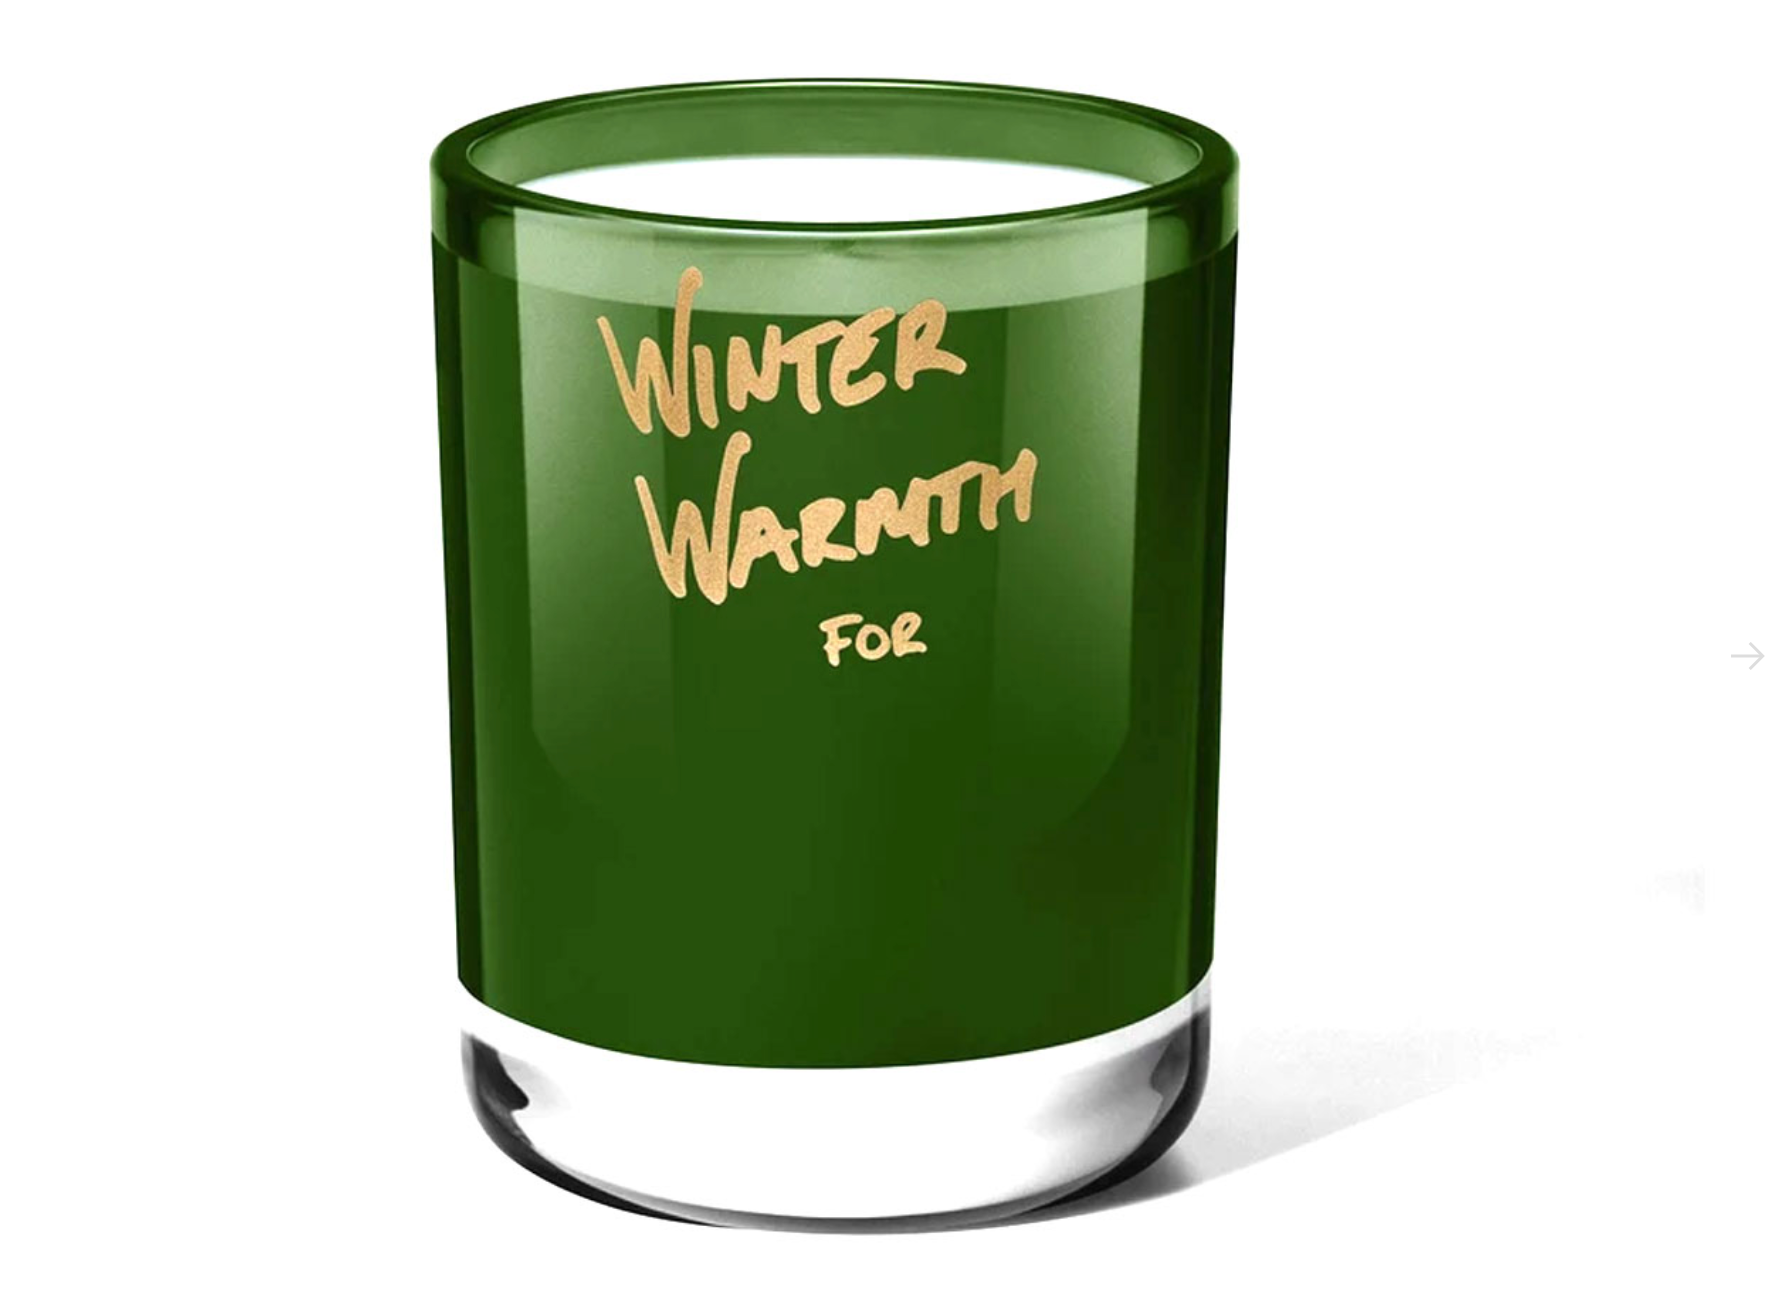 DRAKE'S BETTER WORLD FRAGRANCE HOUSE RELEASES "WINTER WARMTH" HOLIDAY CANDLE